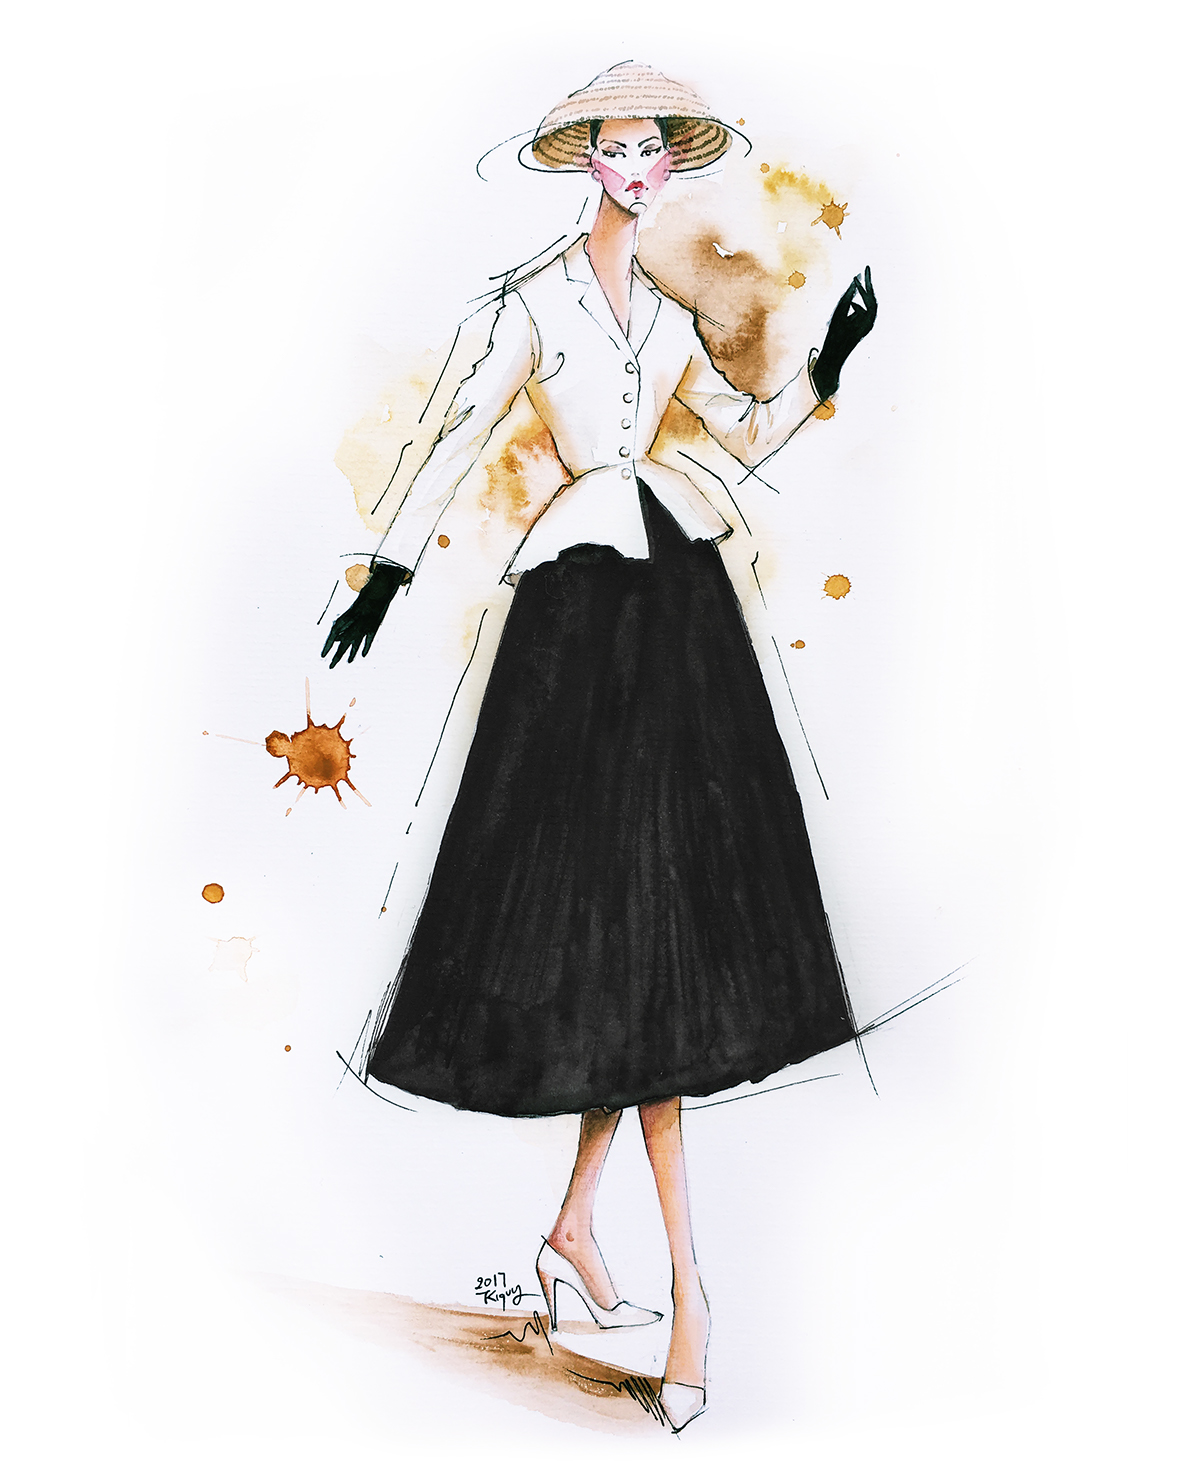 Haute Couture Jadore the new dior 2019 resort collection   Sketch was  made   Fashion design sketchbook Illustration fashion design Fashion  design sketches